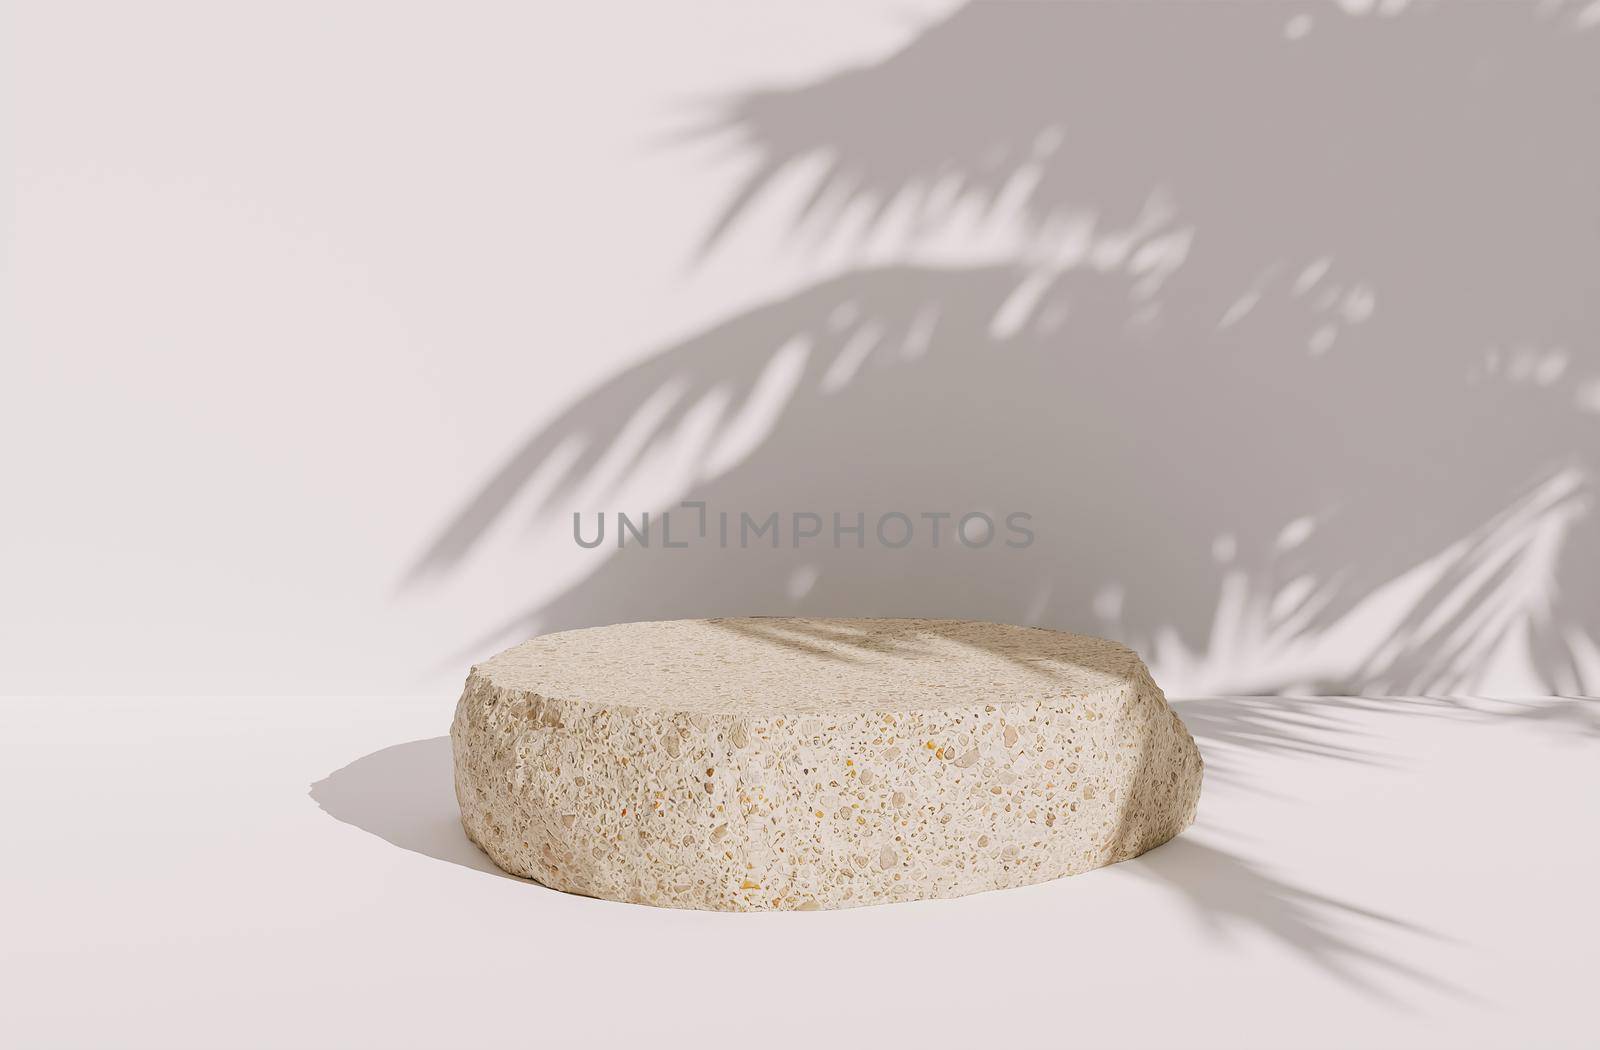 solitary rock for product presentation on white background by asolano